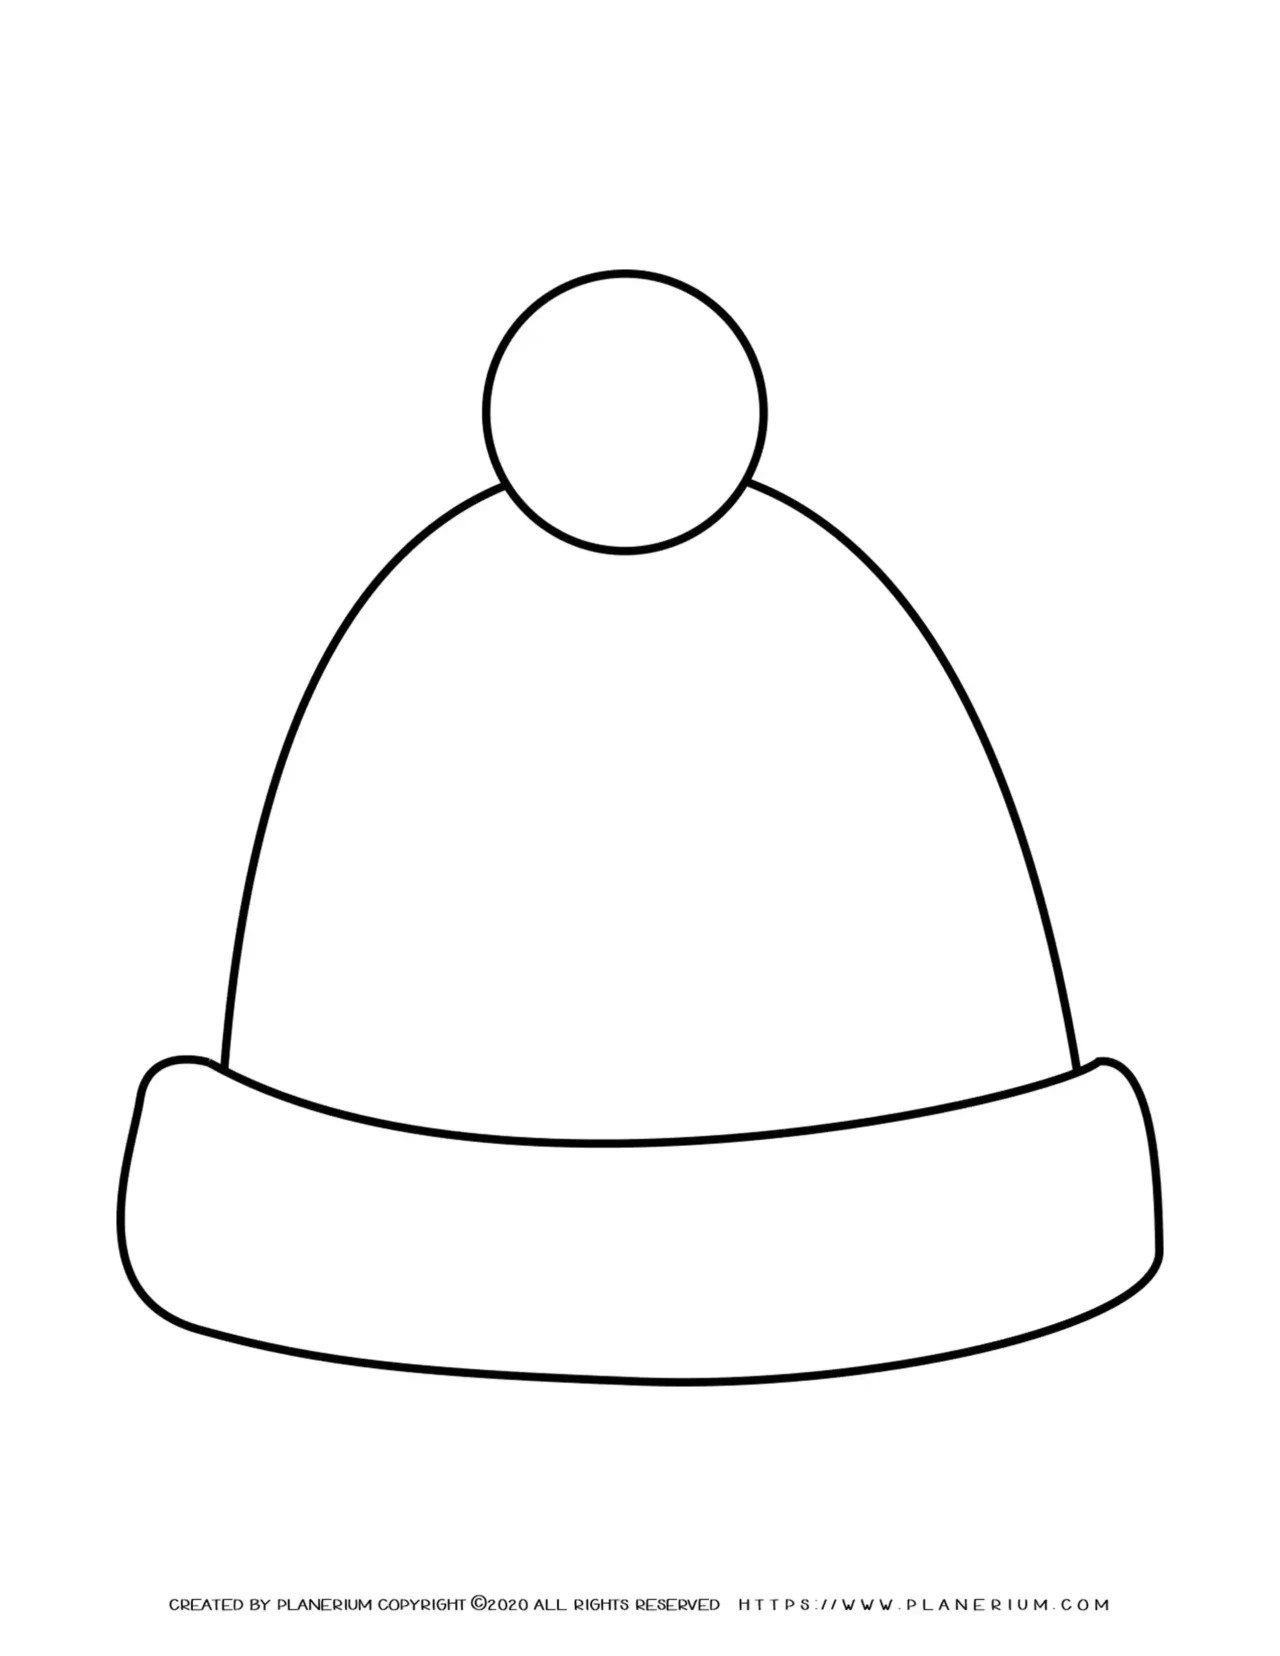 Fall Season - Coloring Page - Hat Template